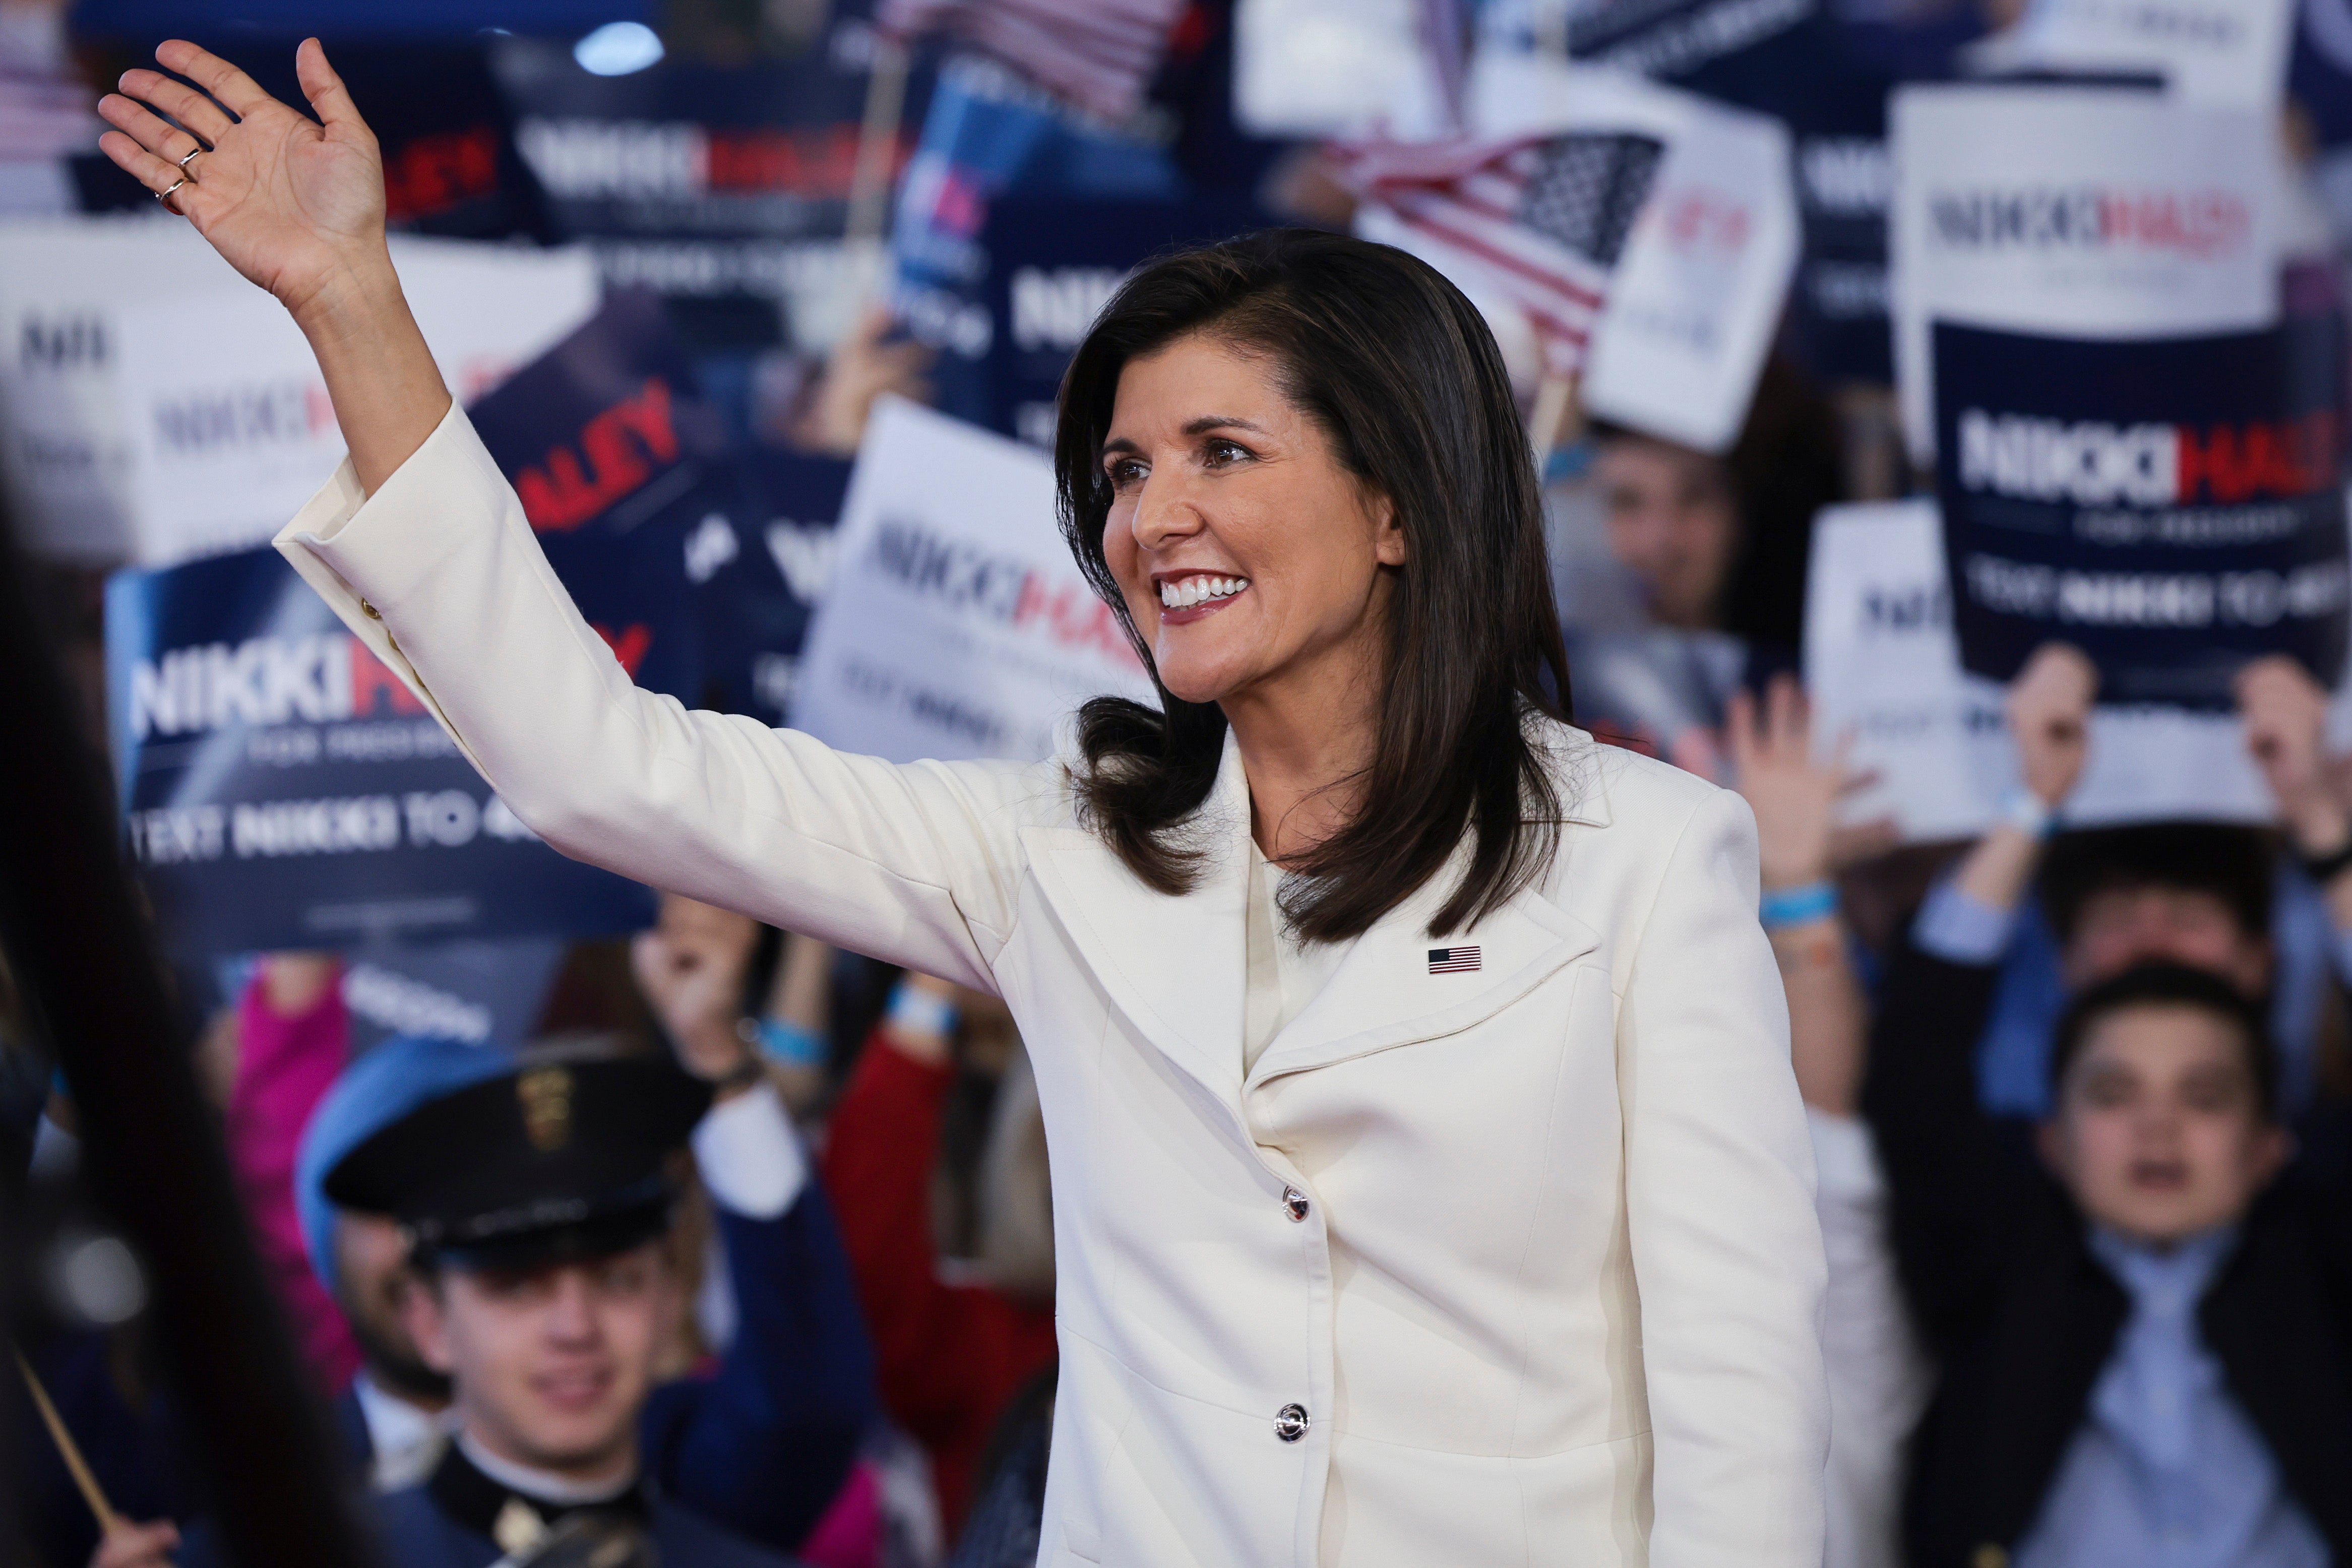 Republican candidate Nikki Haley delivers speech on China